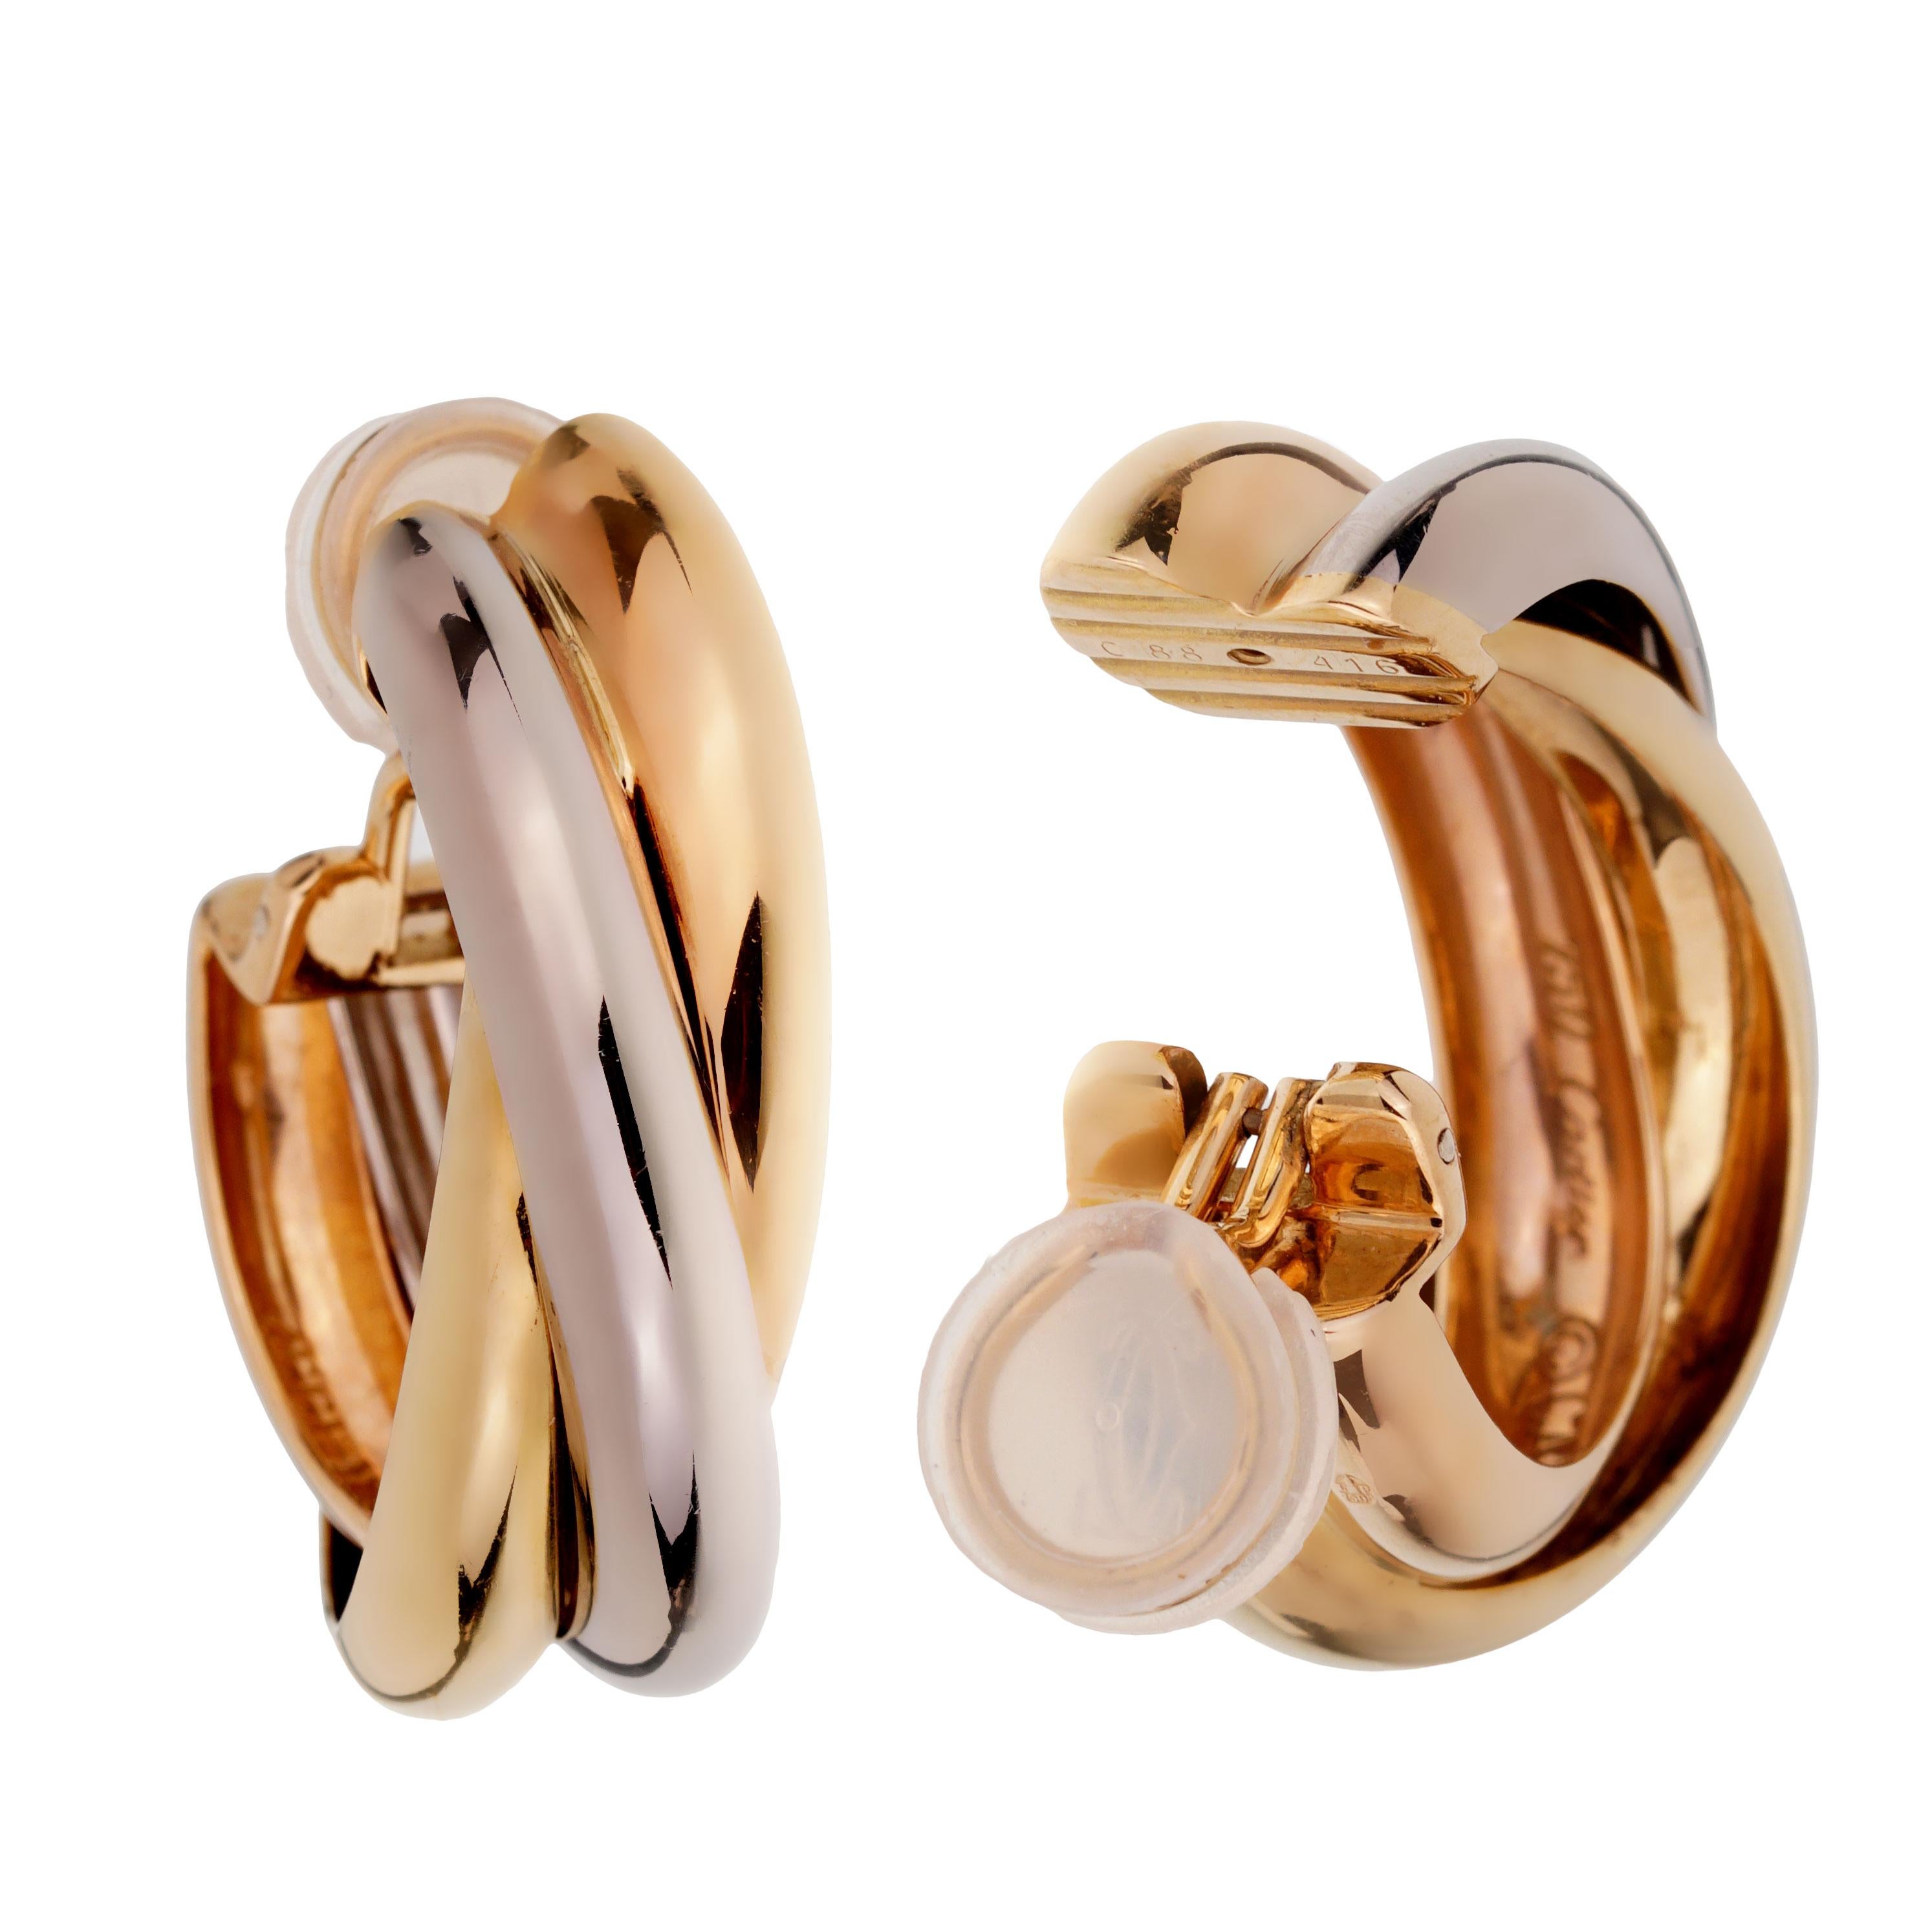 These classic extra-large clip-on earrings from Cartier's Trinity collection feature three elegantly intertwined bands made in 18k yellow, white and rose gold.

Length: 1.18